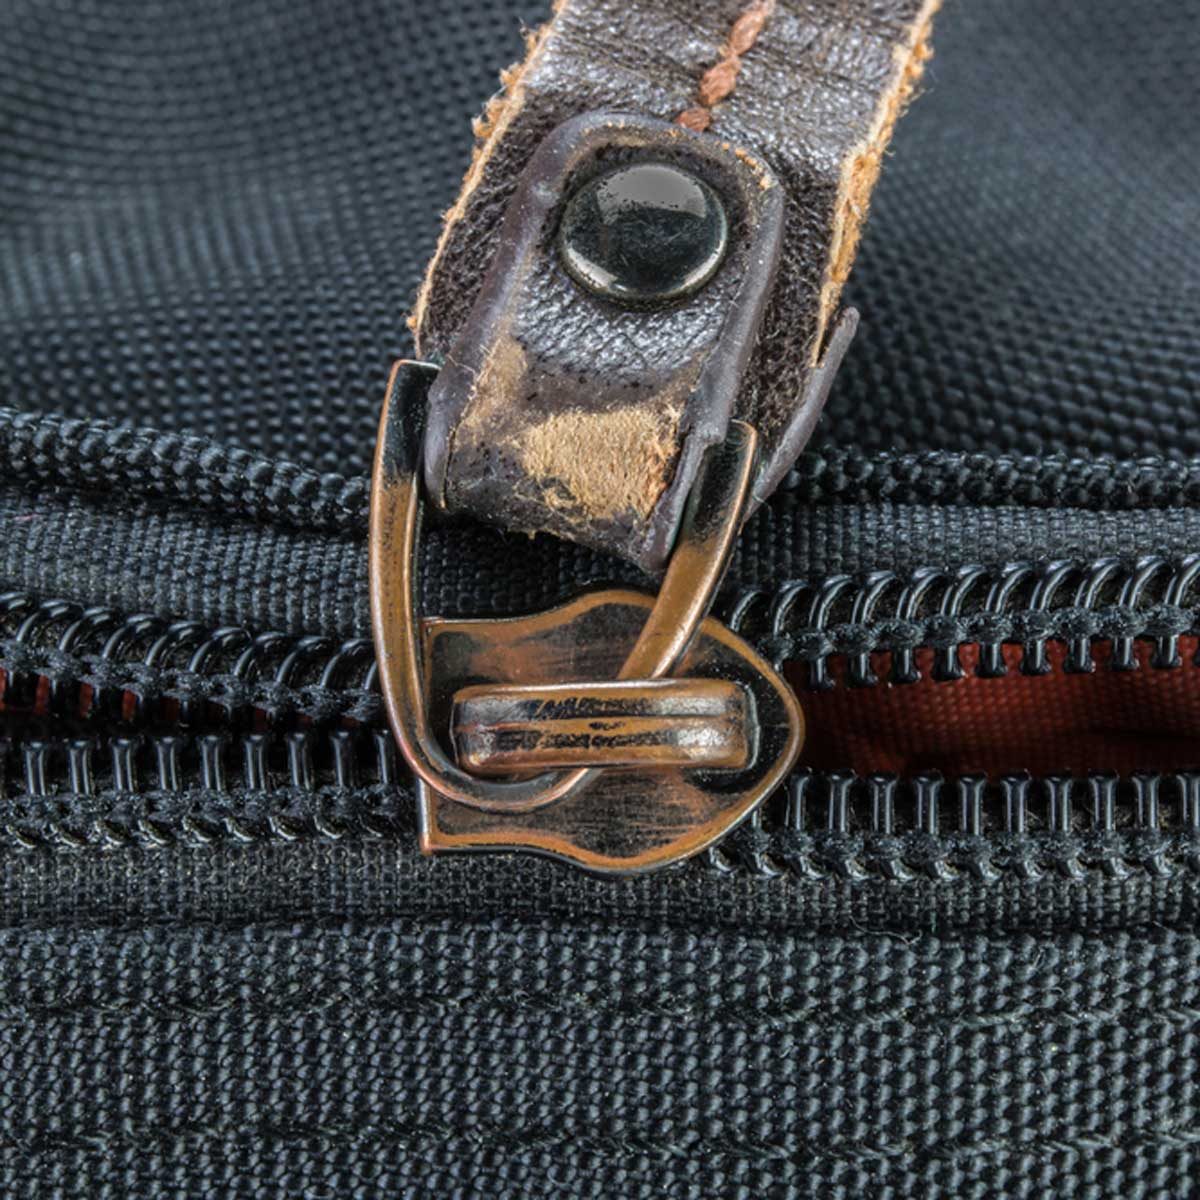 How to repair a ZIPPER : 10 zip problems & solutions for fixing